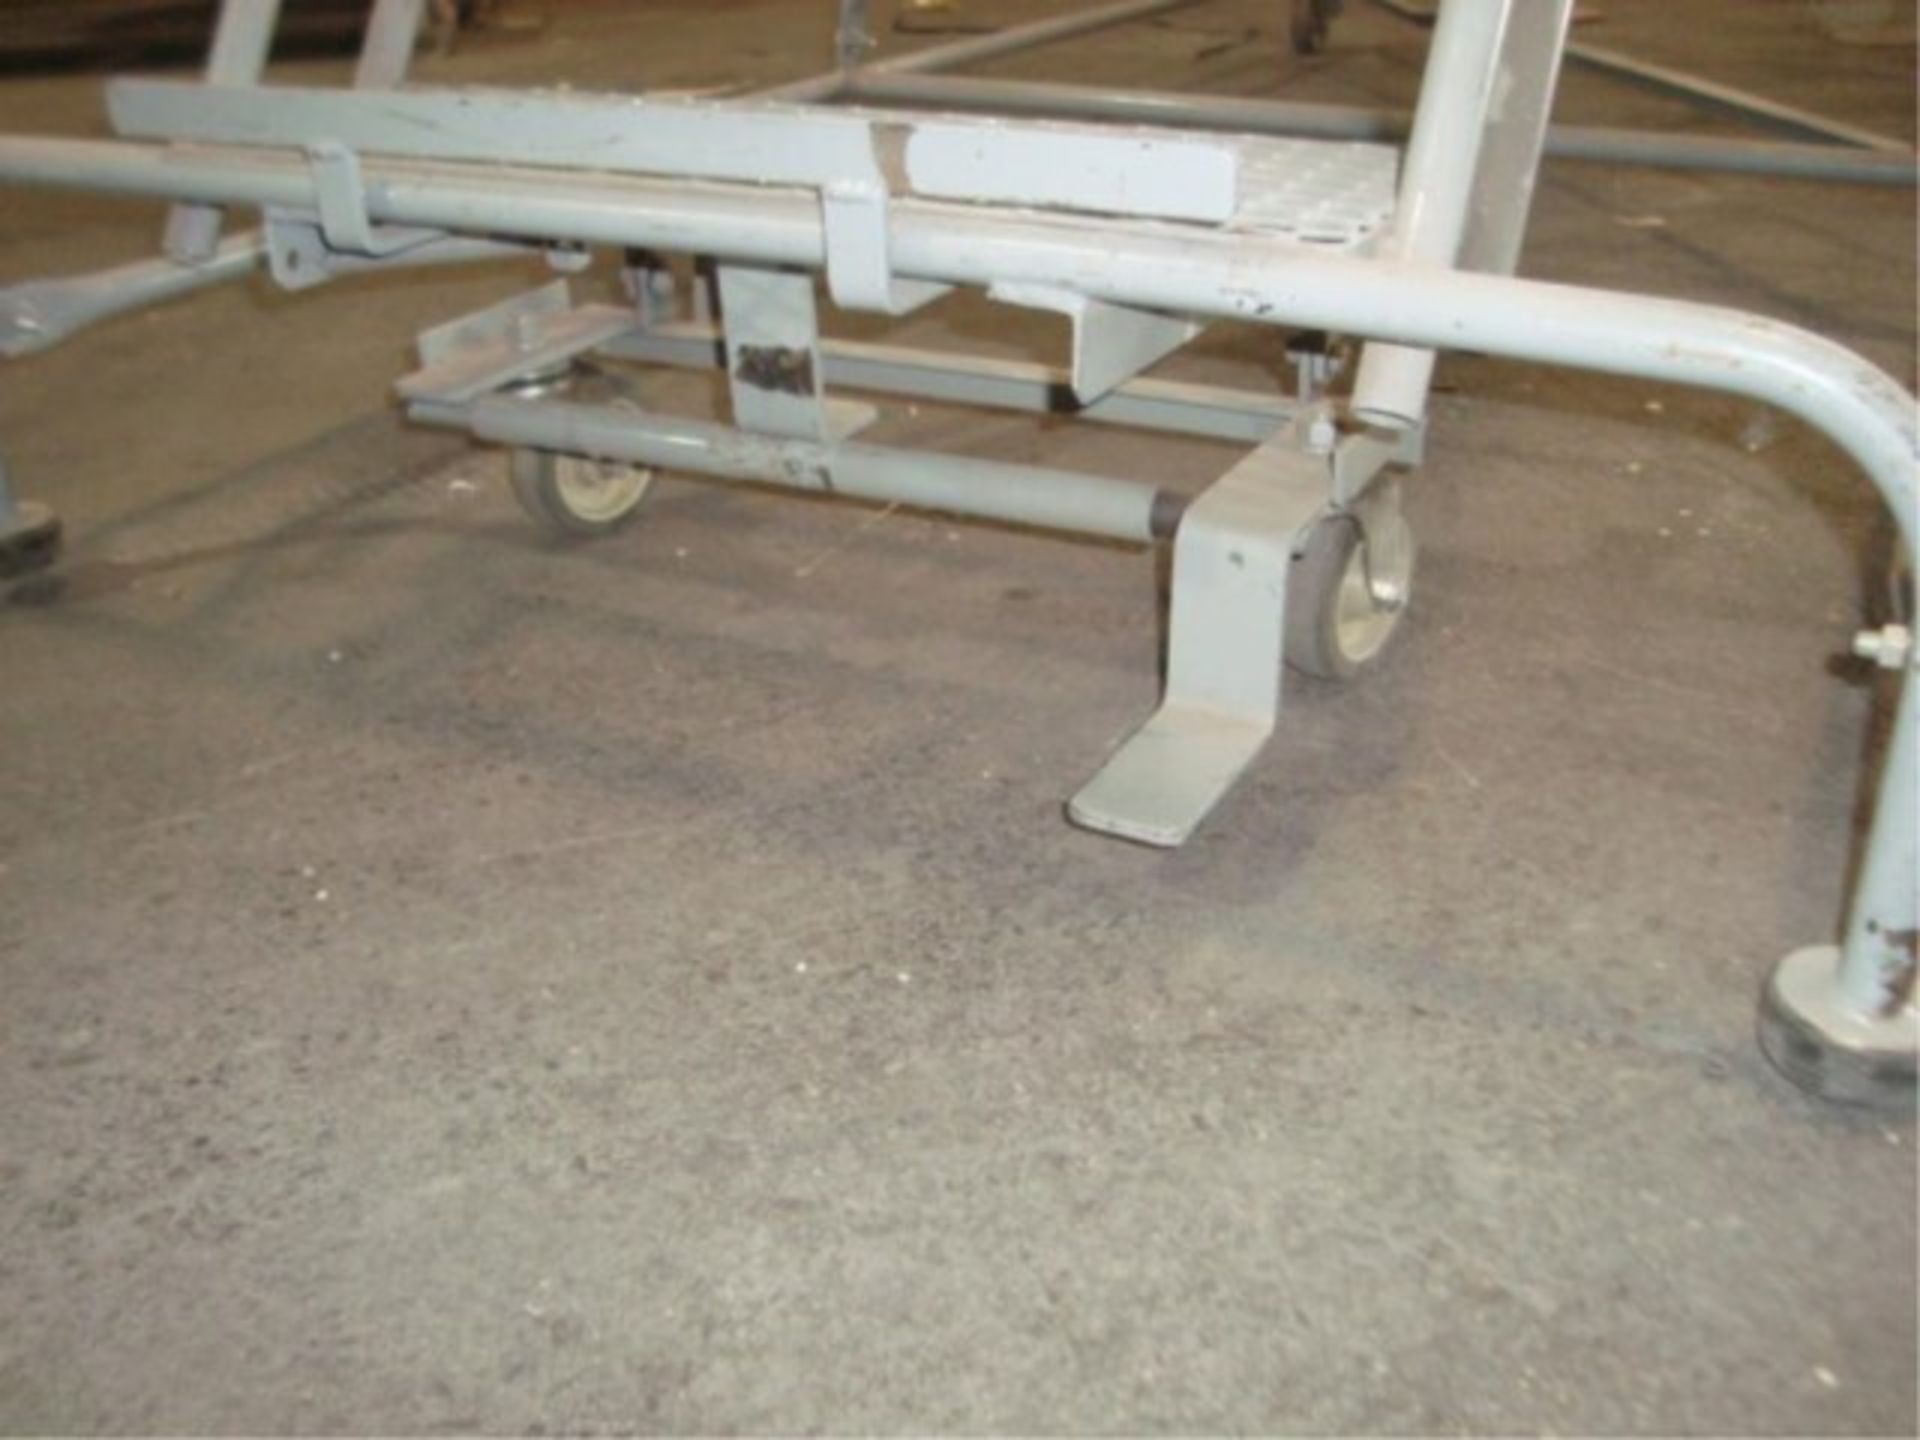 Warehouse Ladders - Image 4 of 5